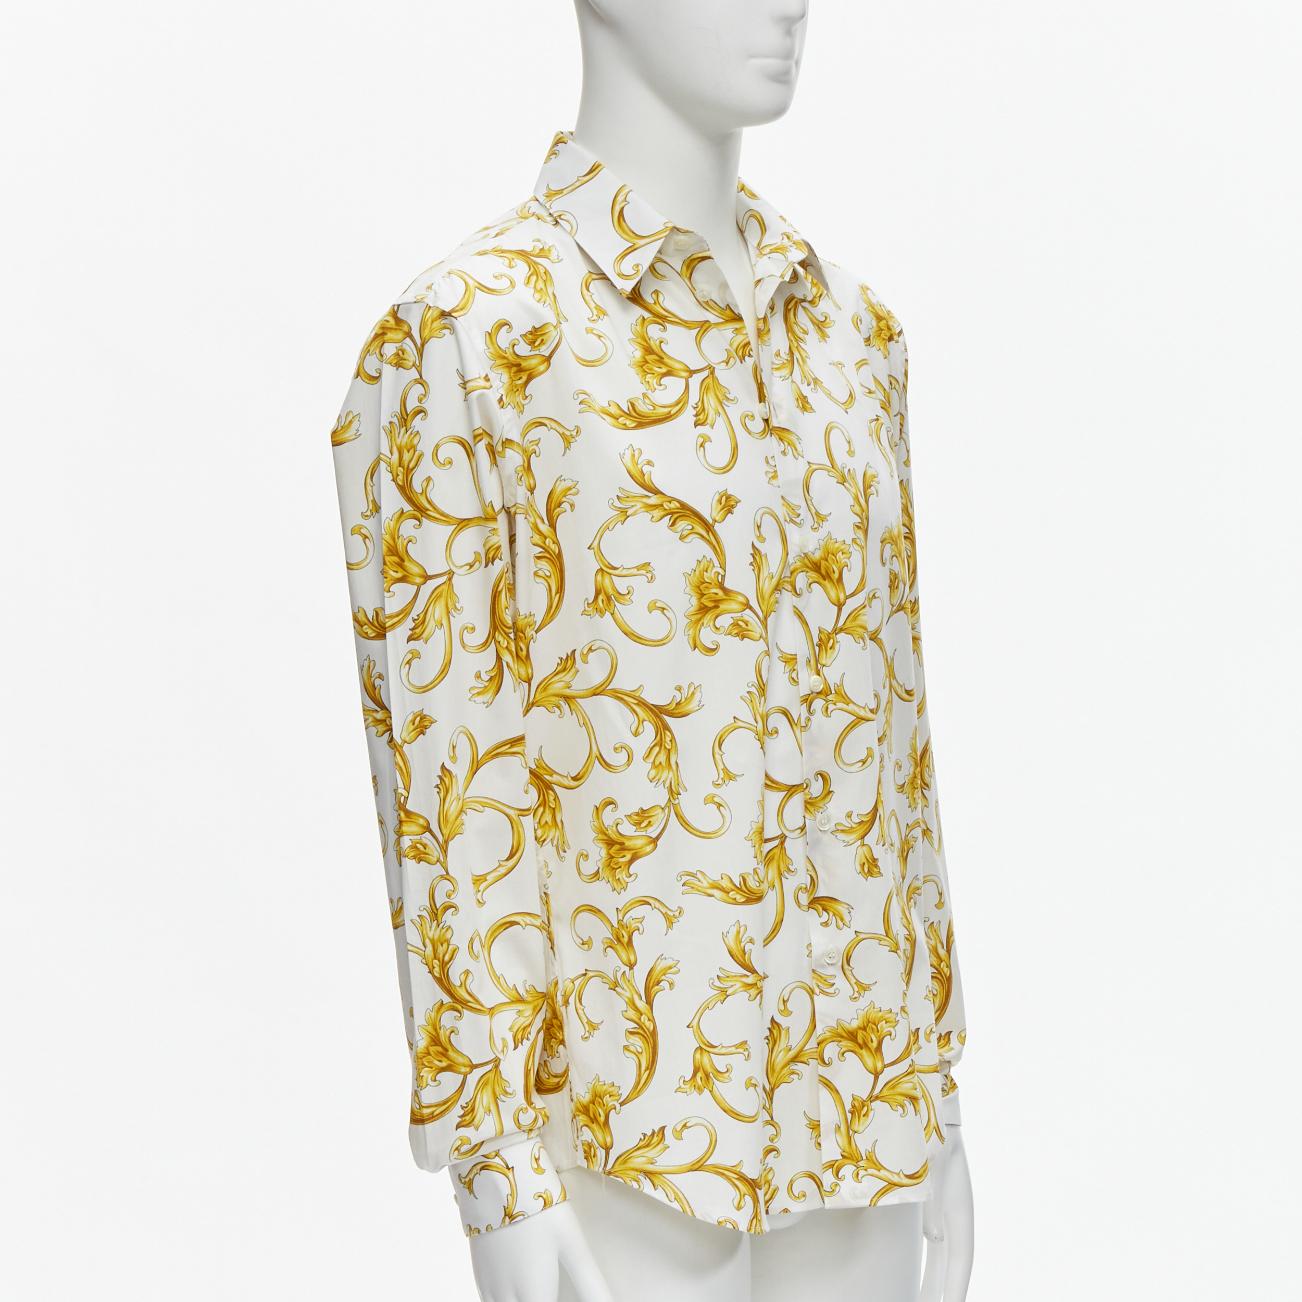 versace white and gold shirt